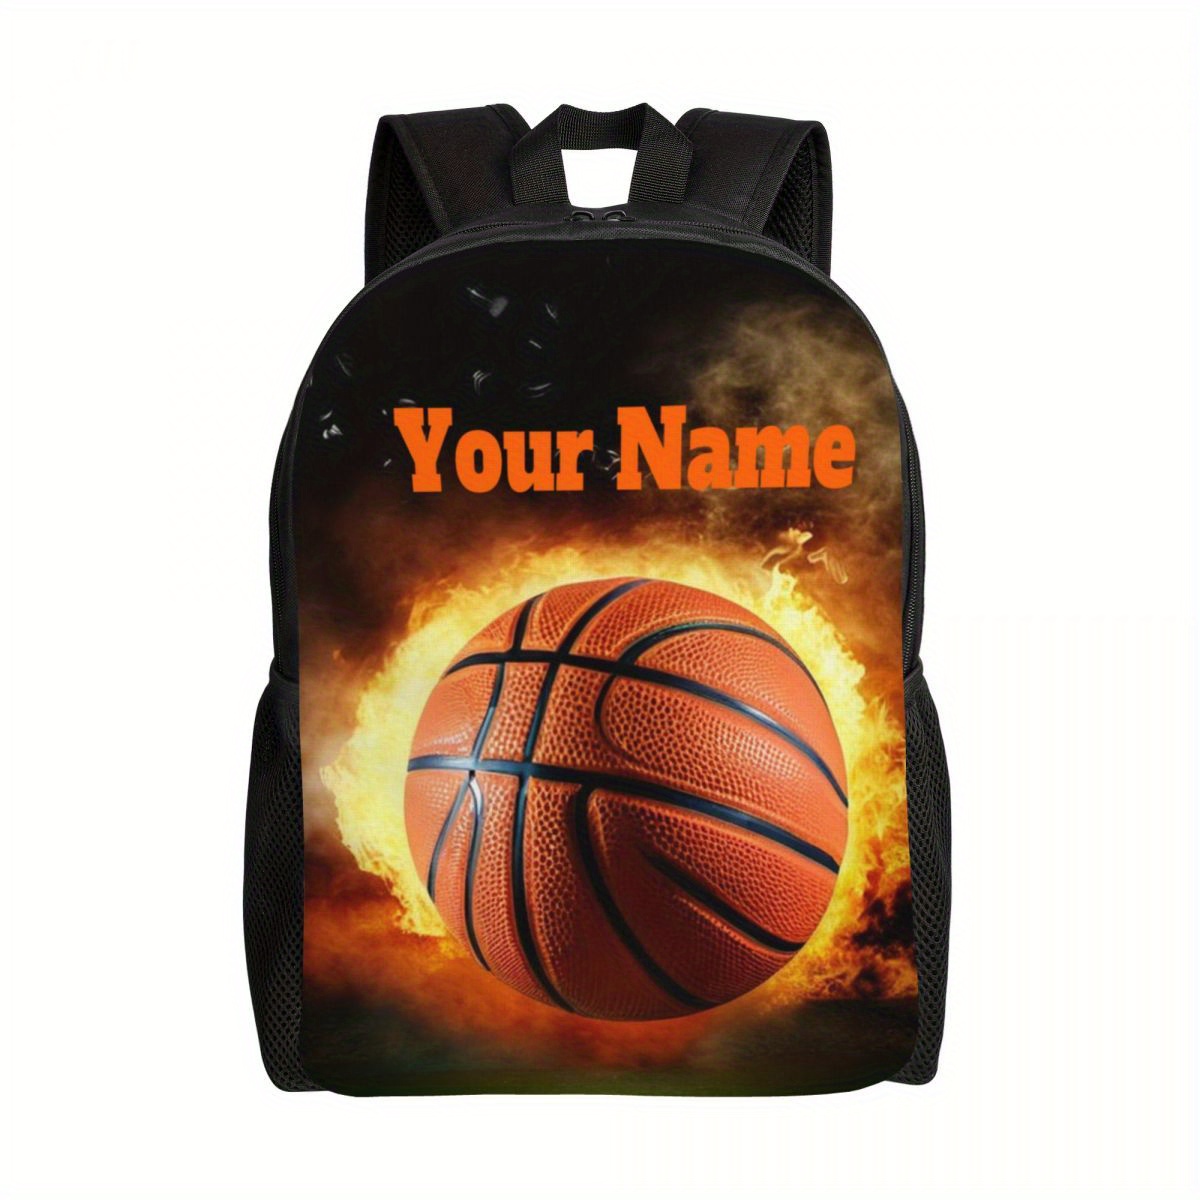 

Add Your Name On Burning Basketball, Custom Lightweight Schoolbag Bookbag For Teenager, Personality Casual Backpack For Men Women, Fitness Storage Bag, Perfect For Hanging Out & Daily Commute